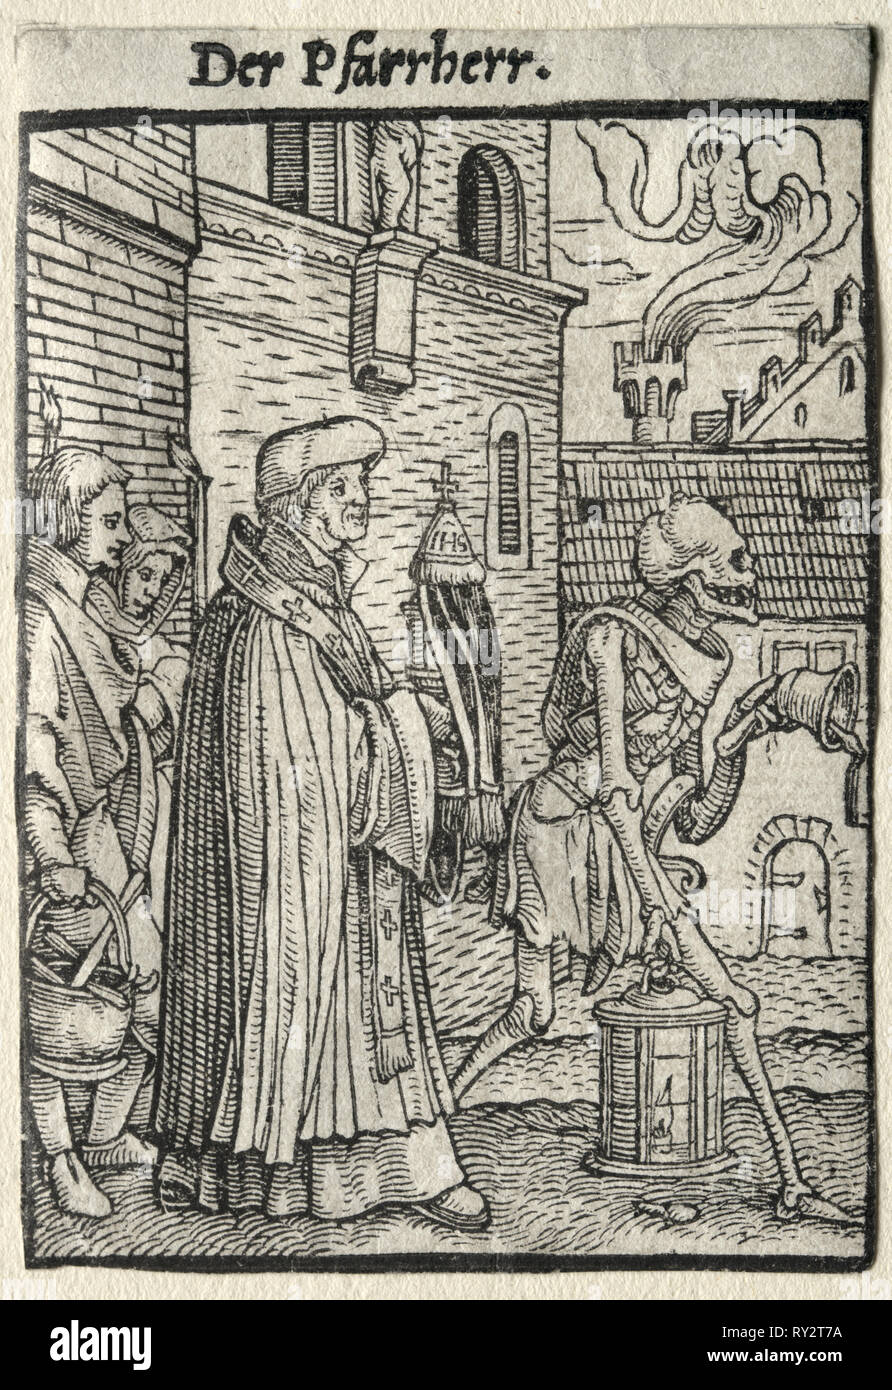 Dance of Death:  The Pastor. Hans Holbein (German, 1497/98-1543). Woodcut Stock Photo